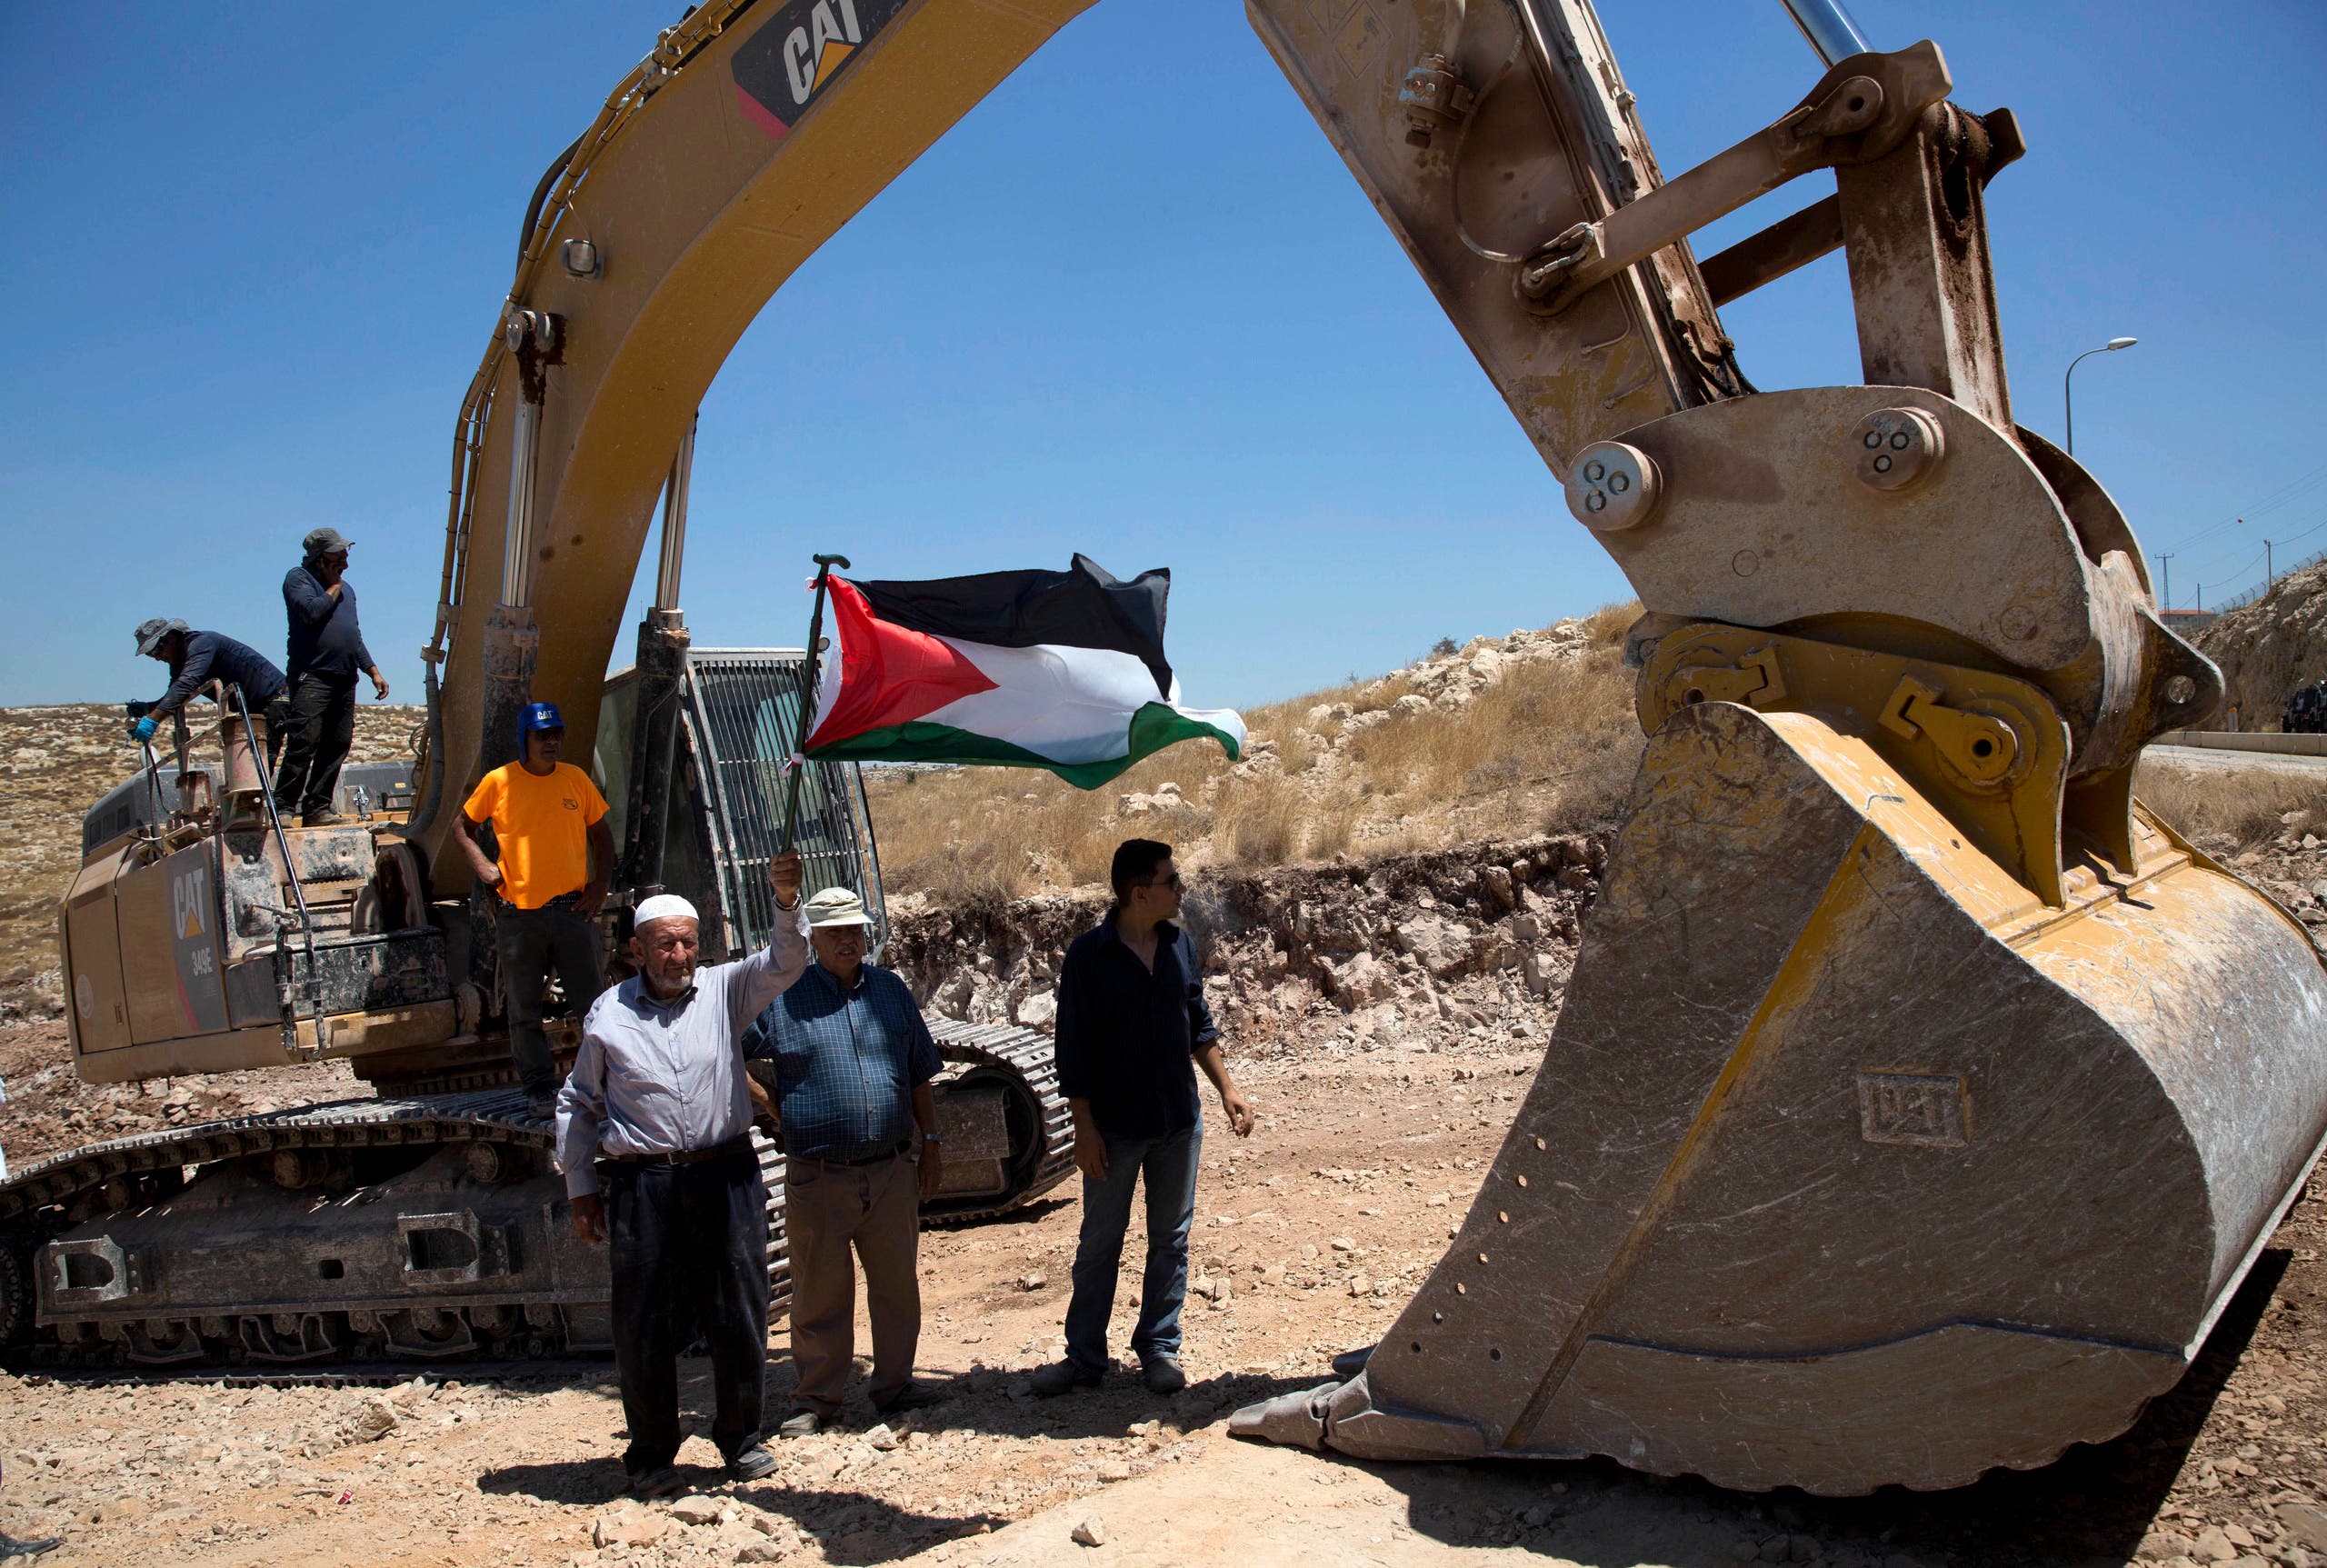 Palestinians demonstrate in front of Israeli bulldozers that were bulldozing land outside Deir Qaddis village near Ramallah for an apparent plan to expand a nearby Jewish settlement. (File photo: AP)